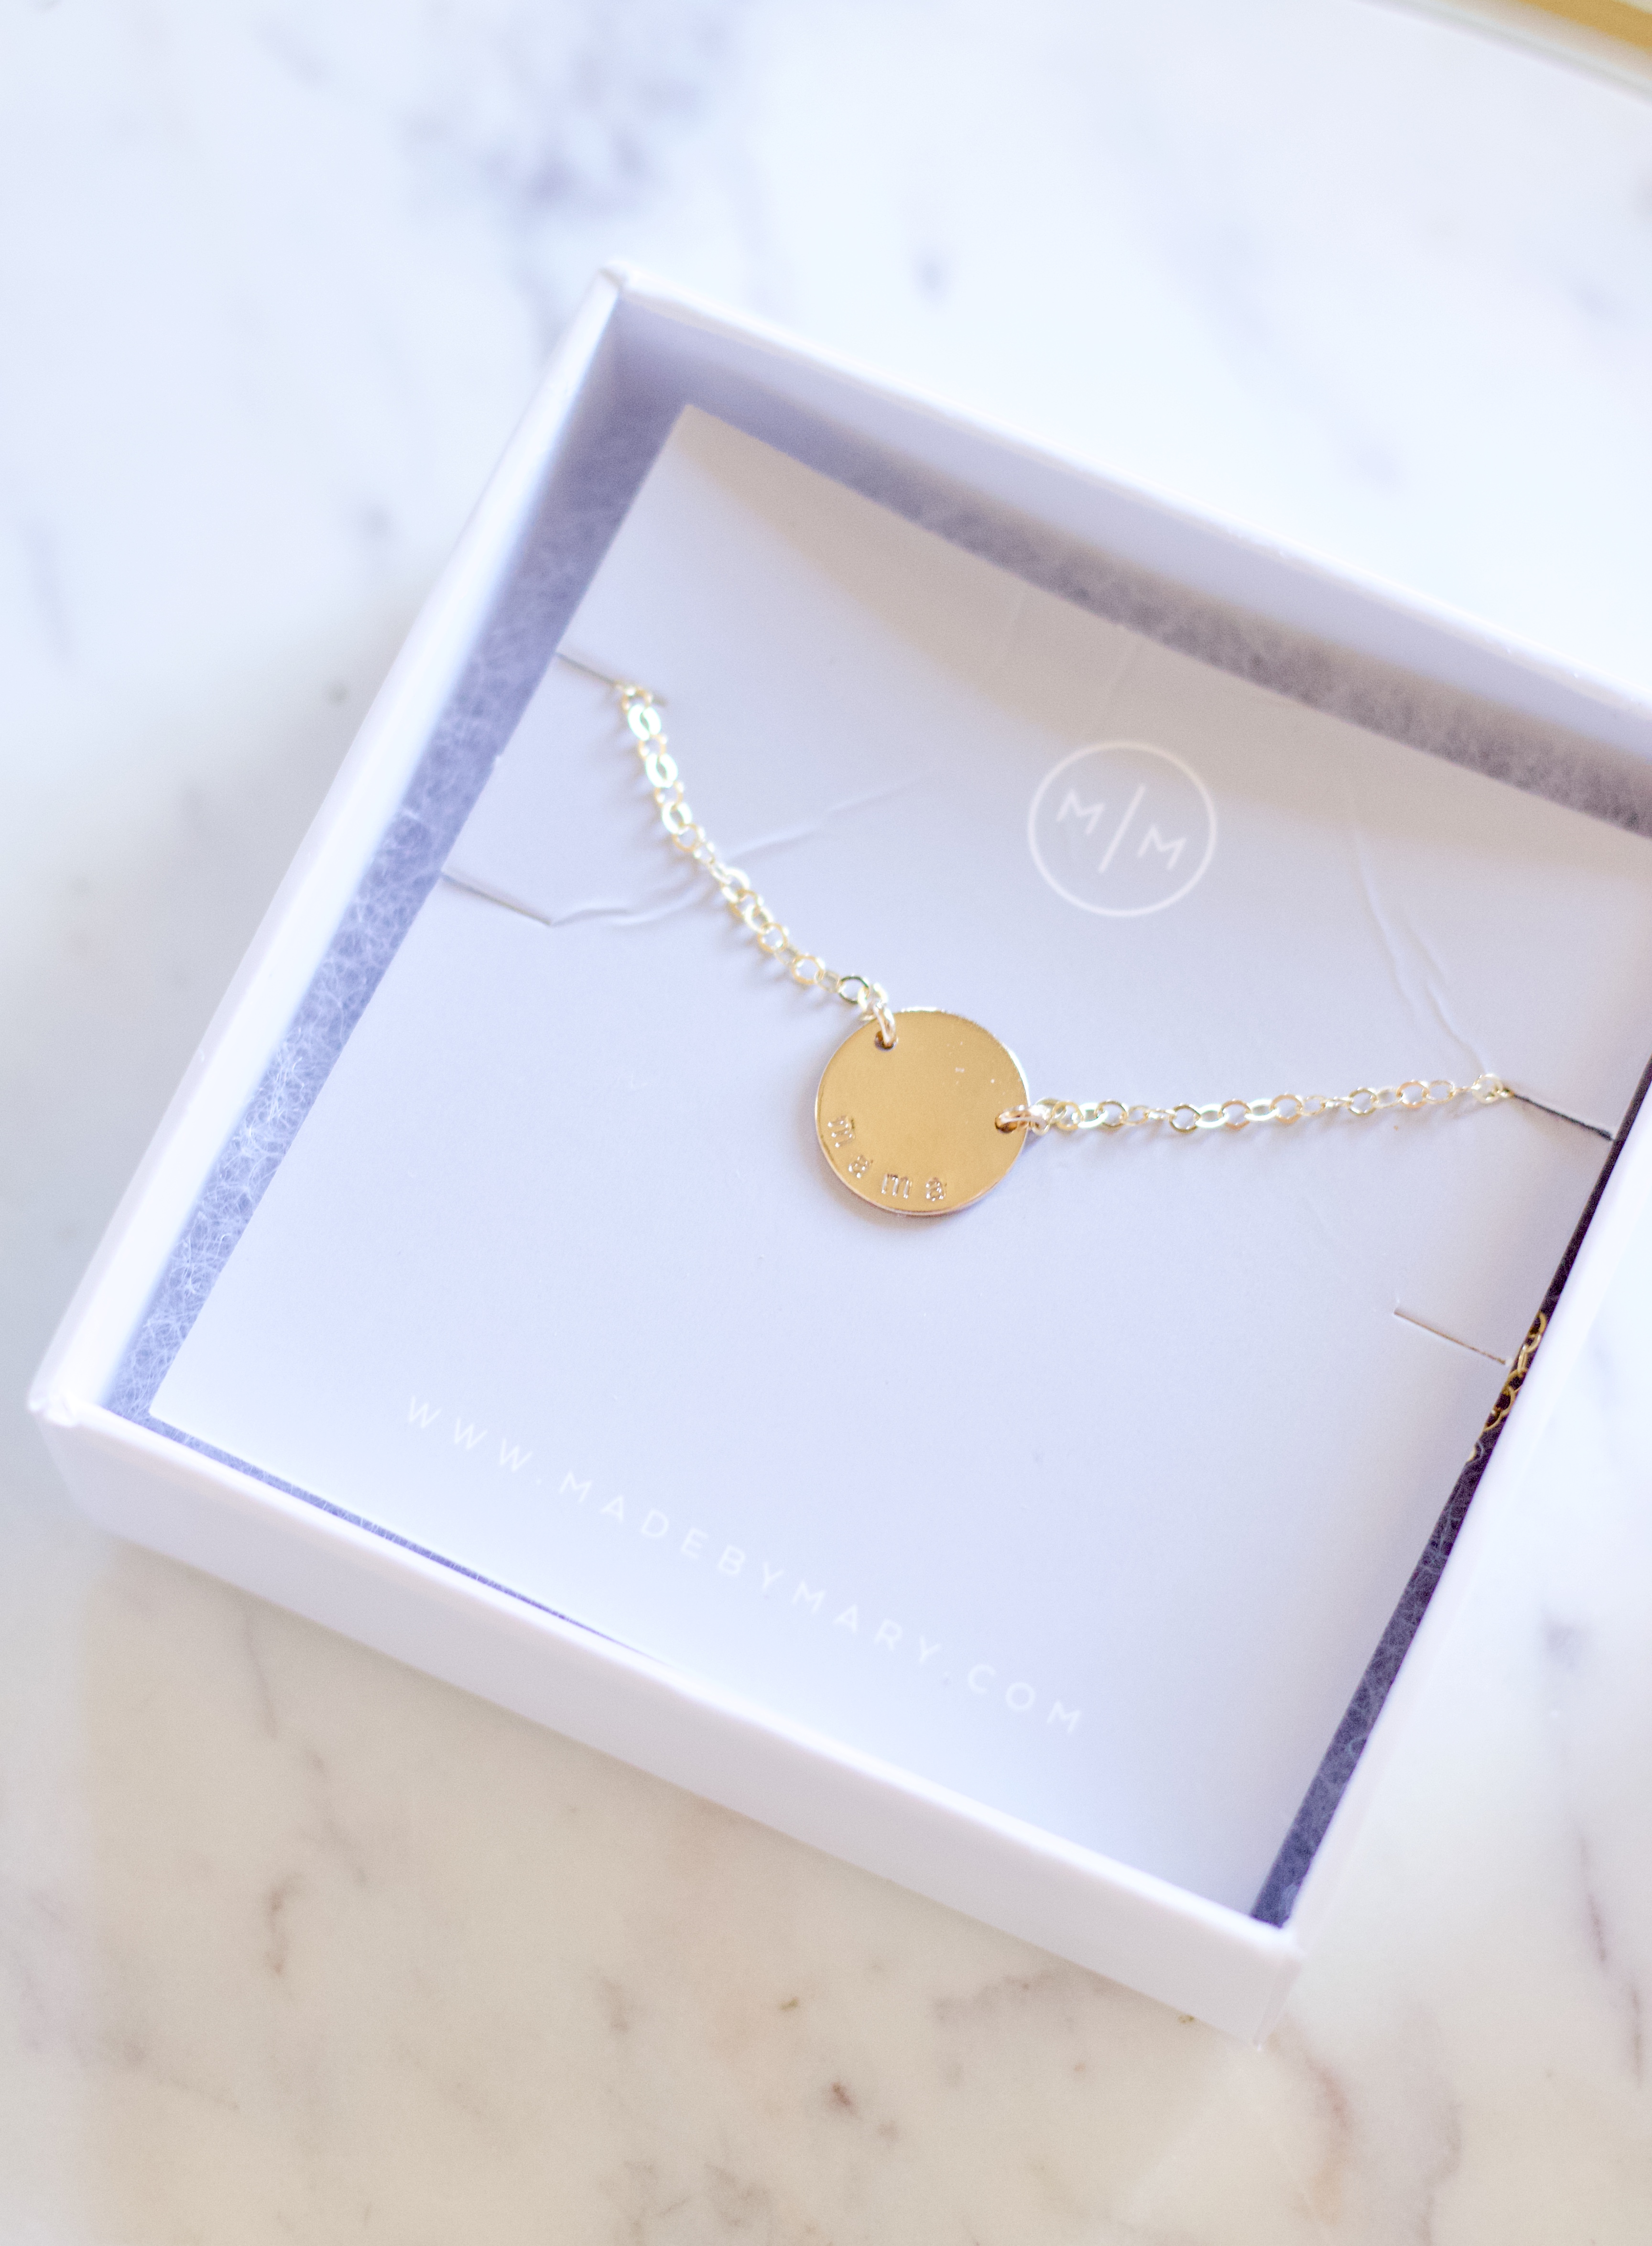 made by mary with love mama necklace #madebymary #momjewelry #giftideas